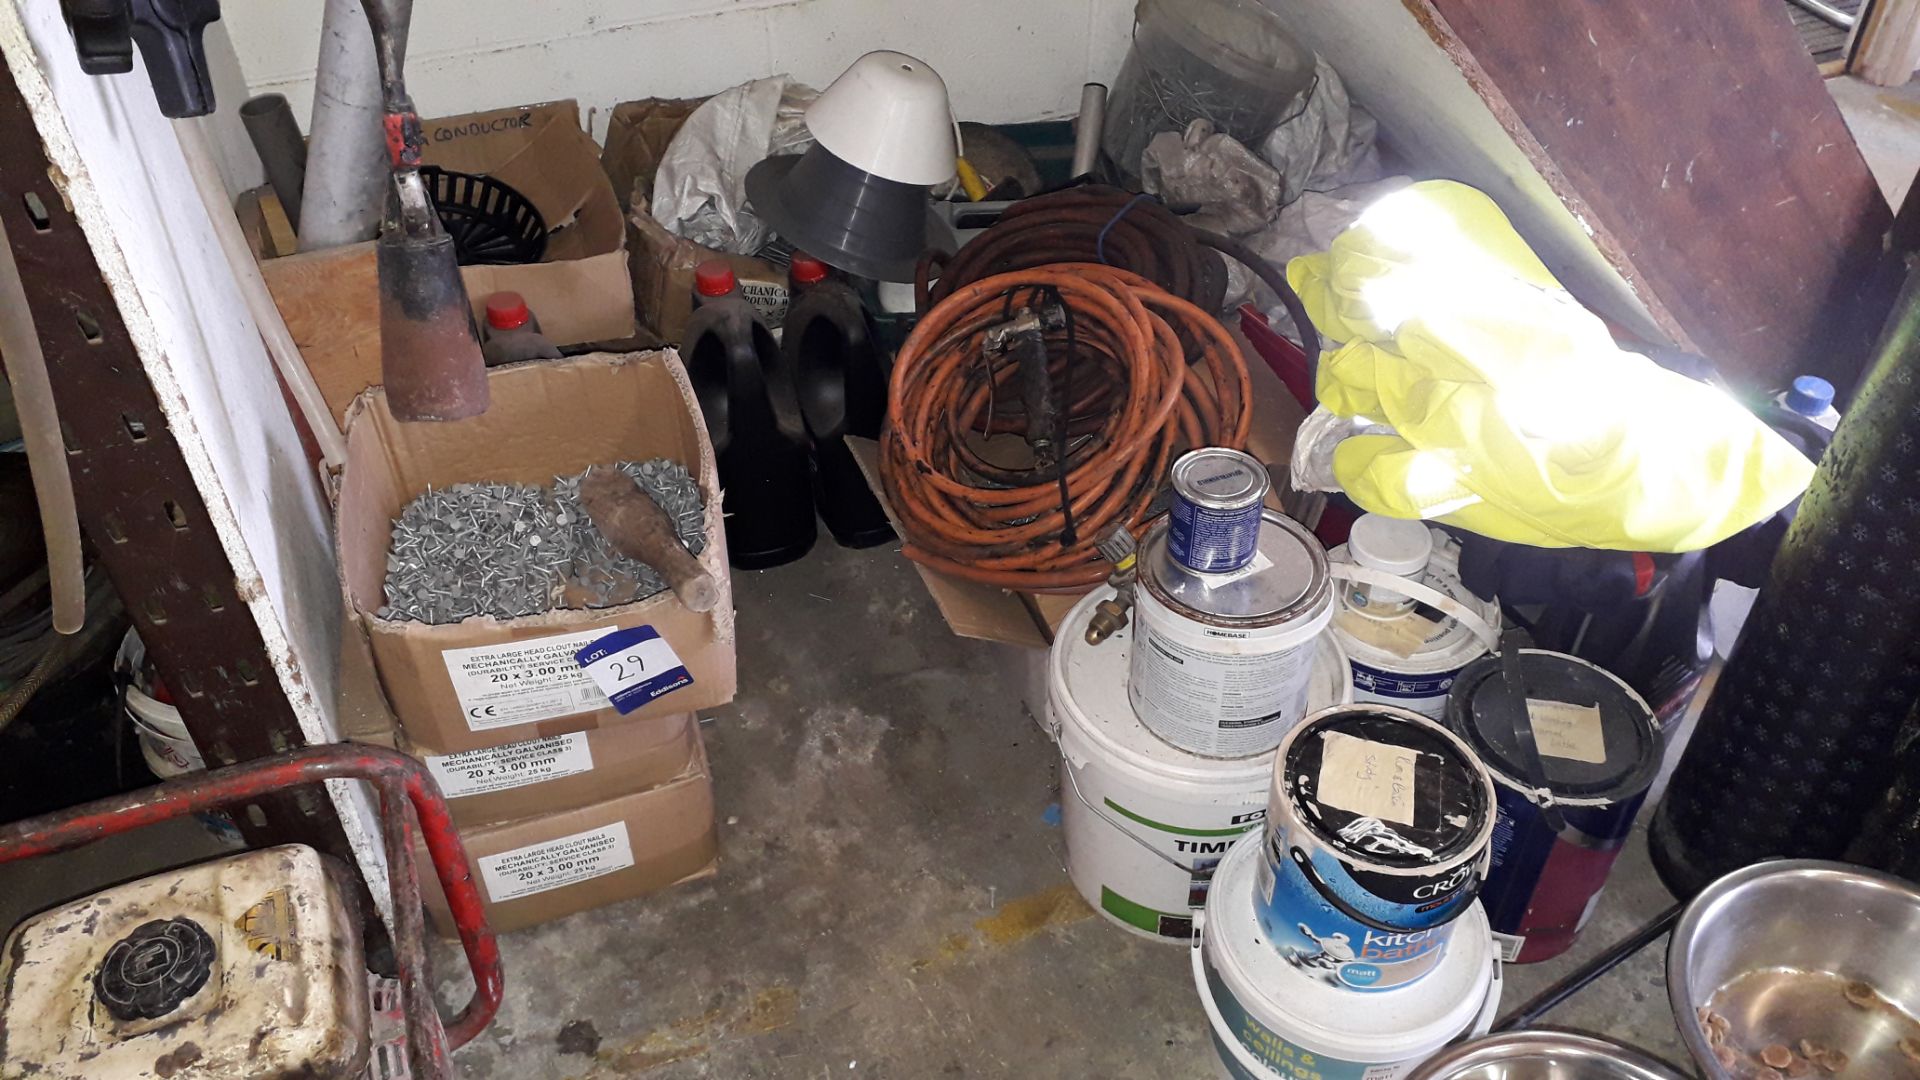 Contents of Under Staircase Storage to include Blow Torch Lines, Hoses, Oils, Nails, Consumables